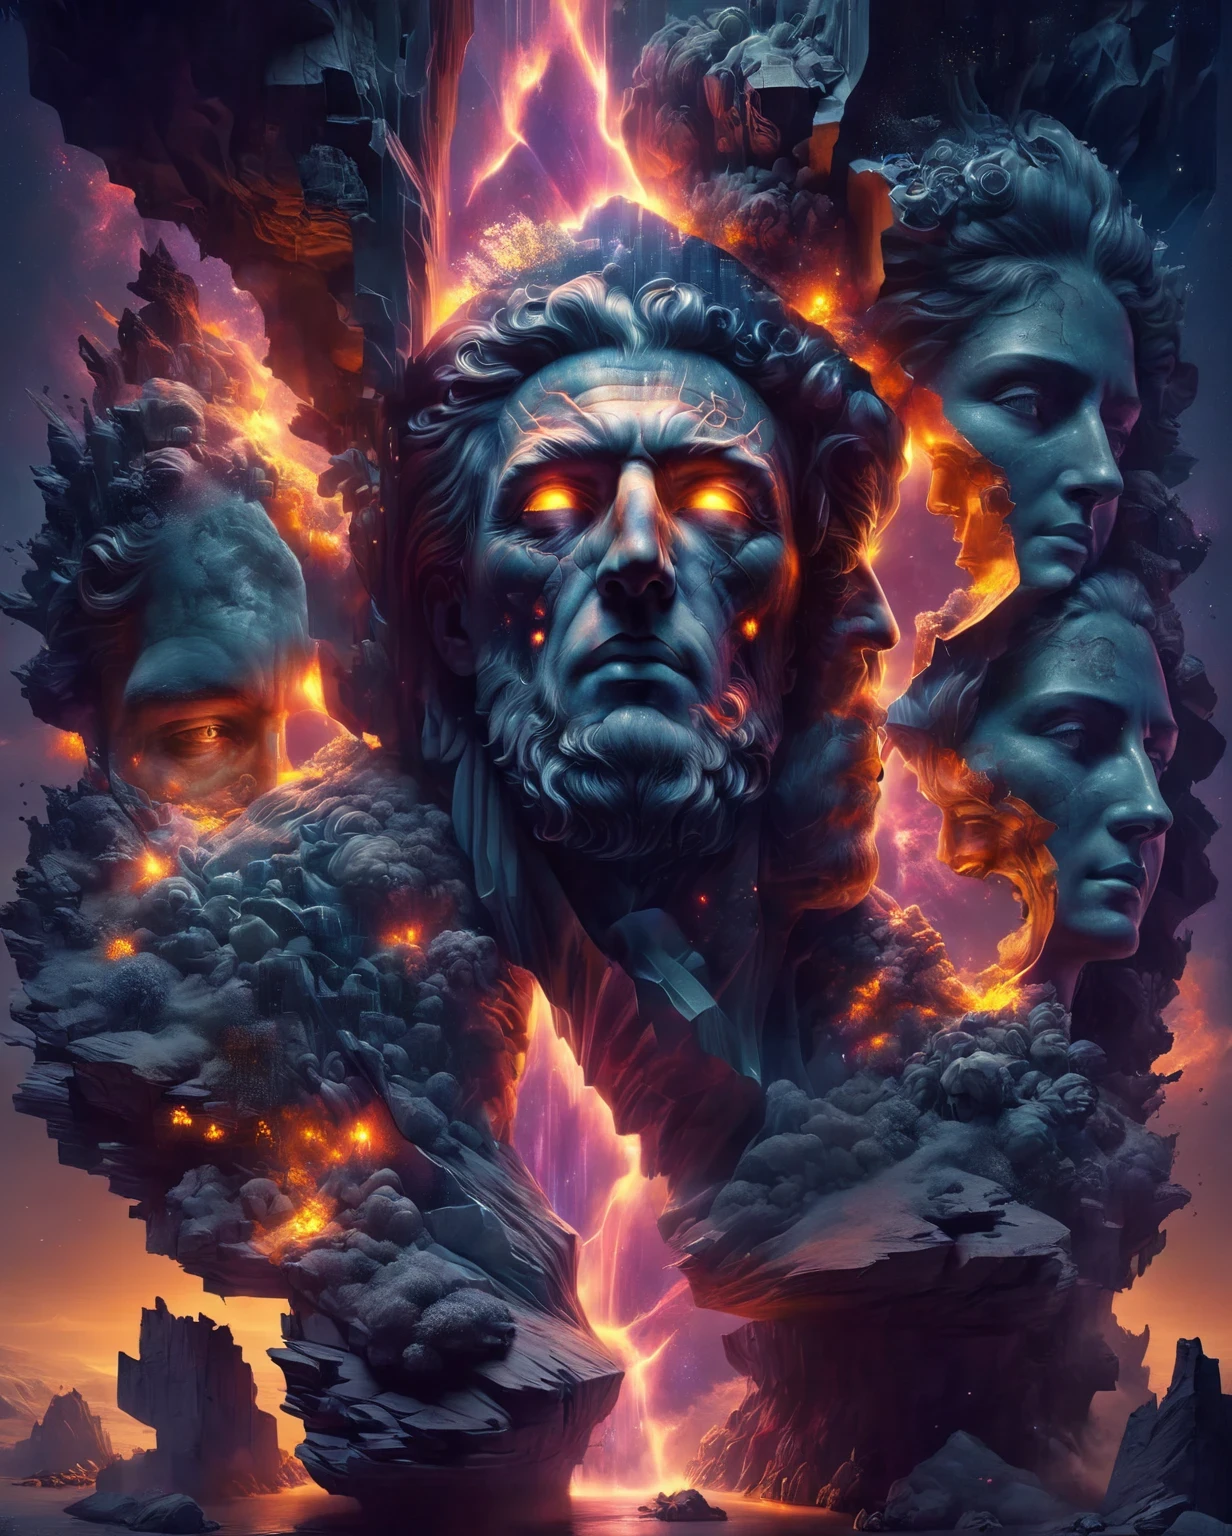 There is a huge statue of a man，There is a face on it, Art style of Philip Hodas, bipur and greg rutkowski, inspired by Filip Hodas, Matte of the human soul, Sylvain Sarai and Igor Molsky, Yuri Shudorf and Tom Bagshaw, bipur art, realism | bipur